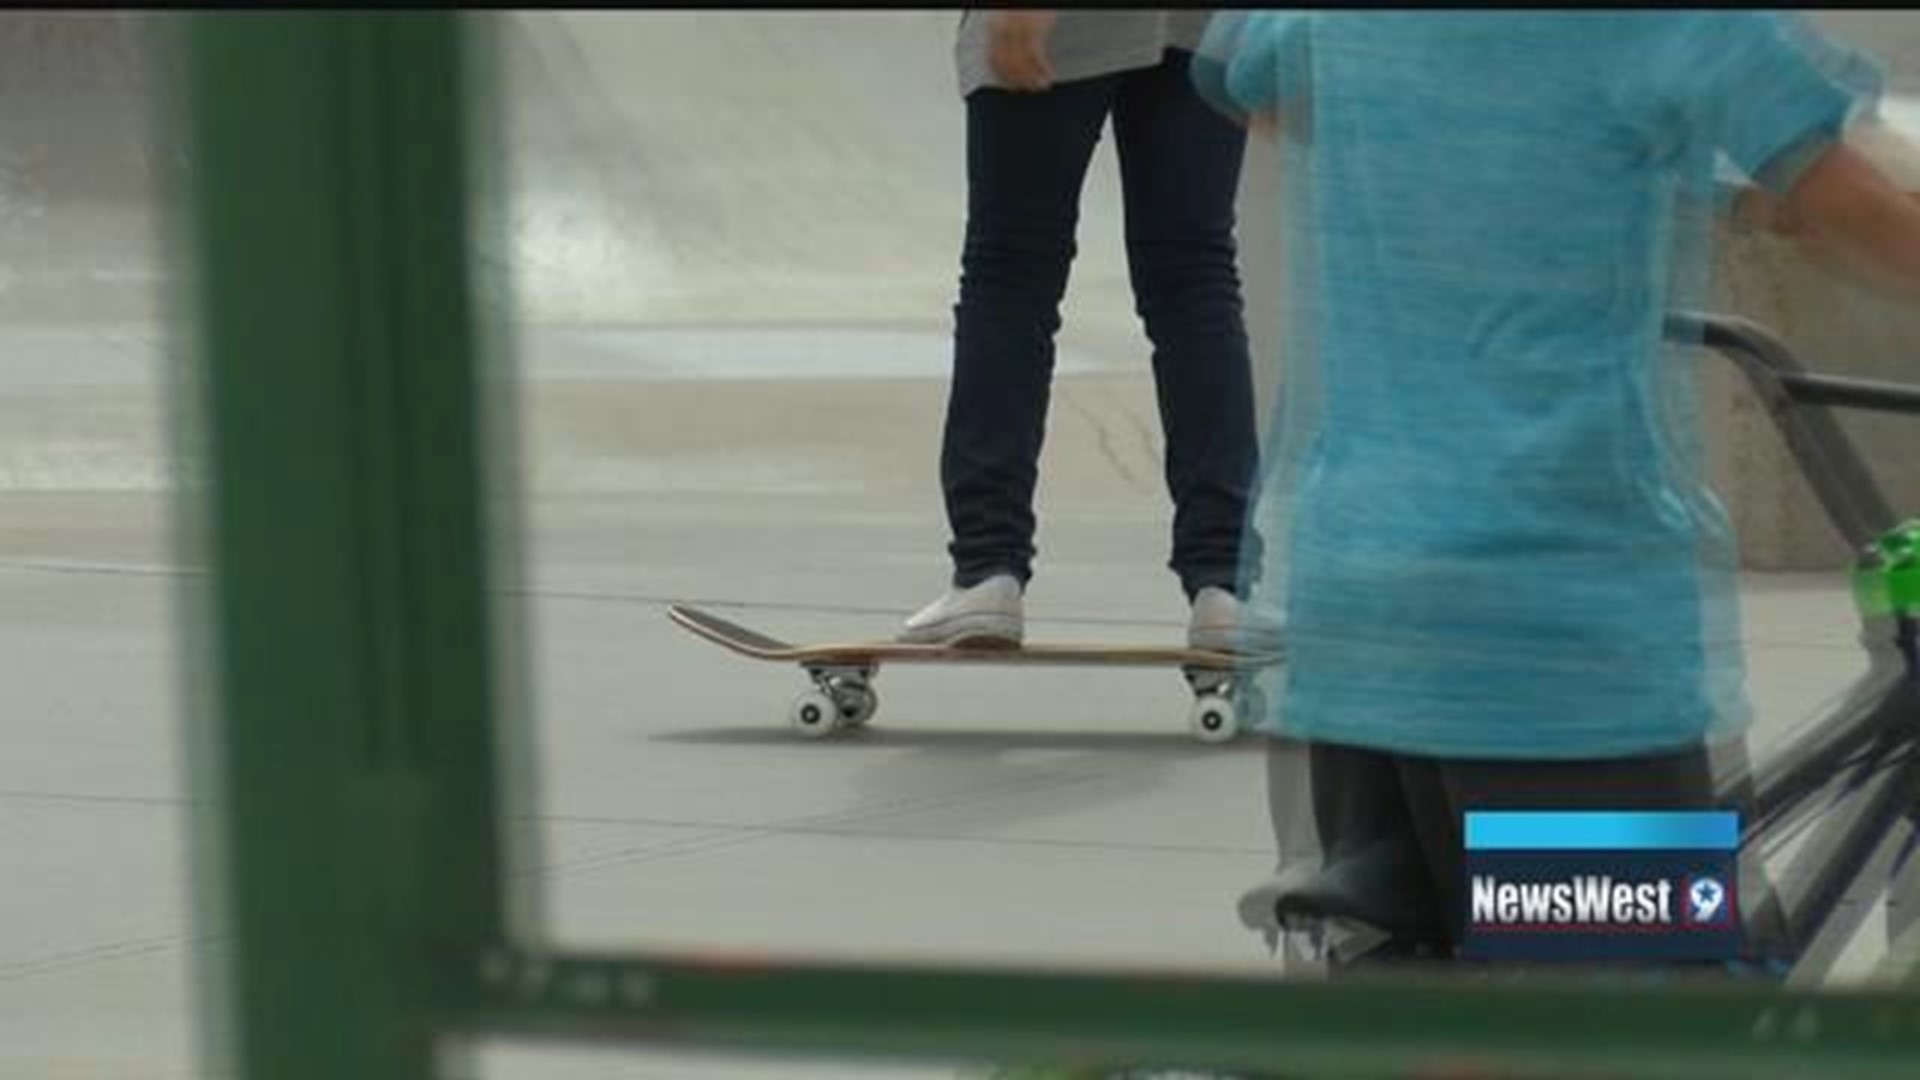 Skateboarders, BMX riders, come together to discuss ways to improve Midland skate park